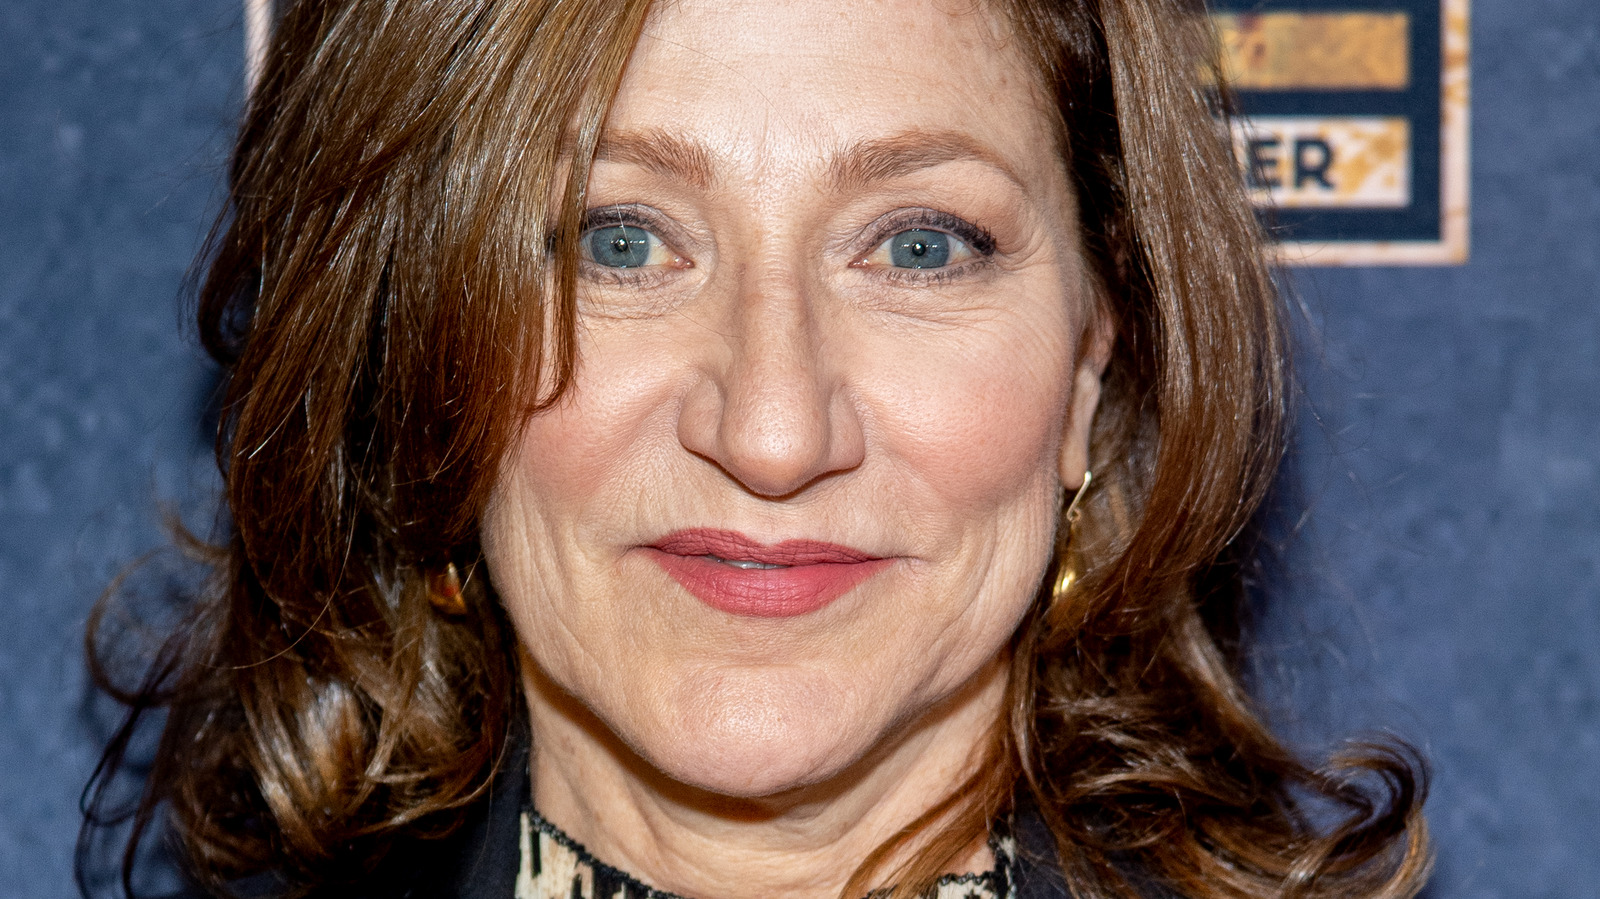 First Official Look At Avatar 2 Villain General Ardmore Played By  Sopranos Actress Edie Falco  THE RONIN